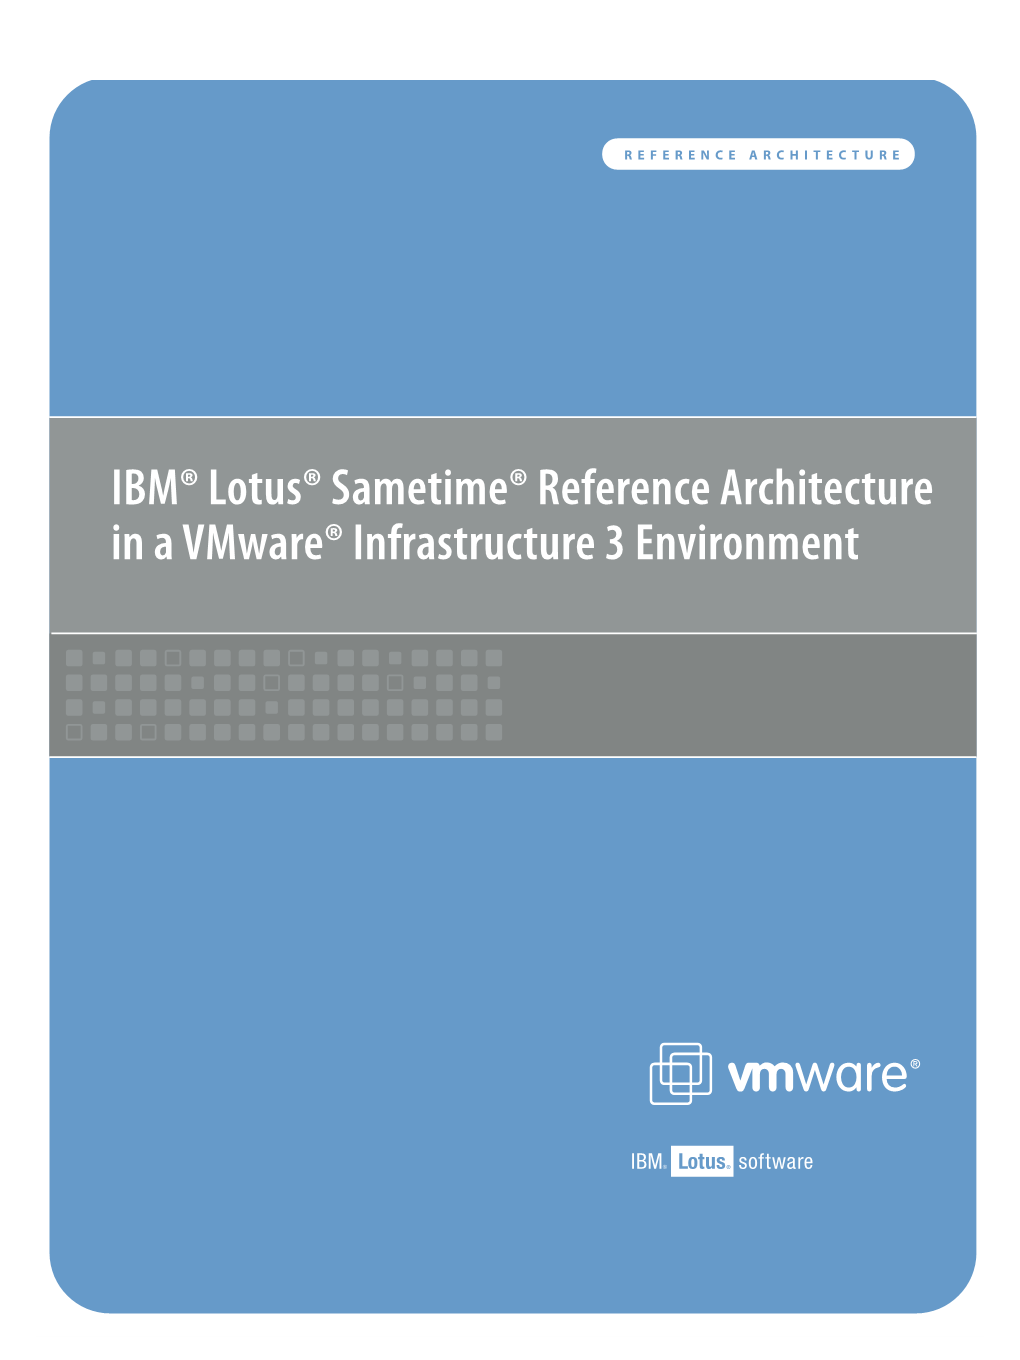 IBM® Lotus® Sametime® Reference Architecture in a Vmware® Infrastructure 3 Environment Reference Architecture